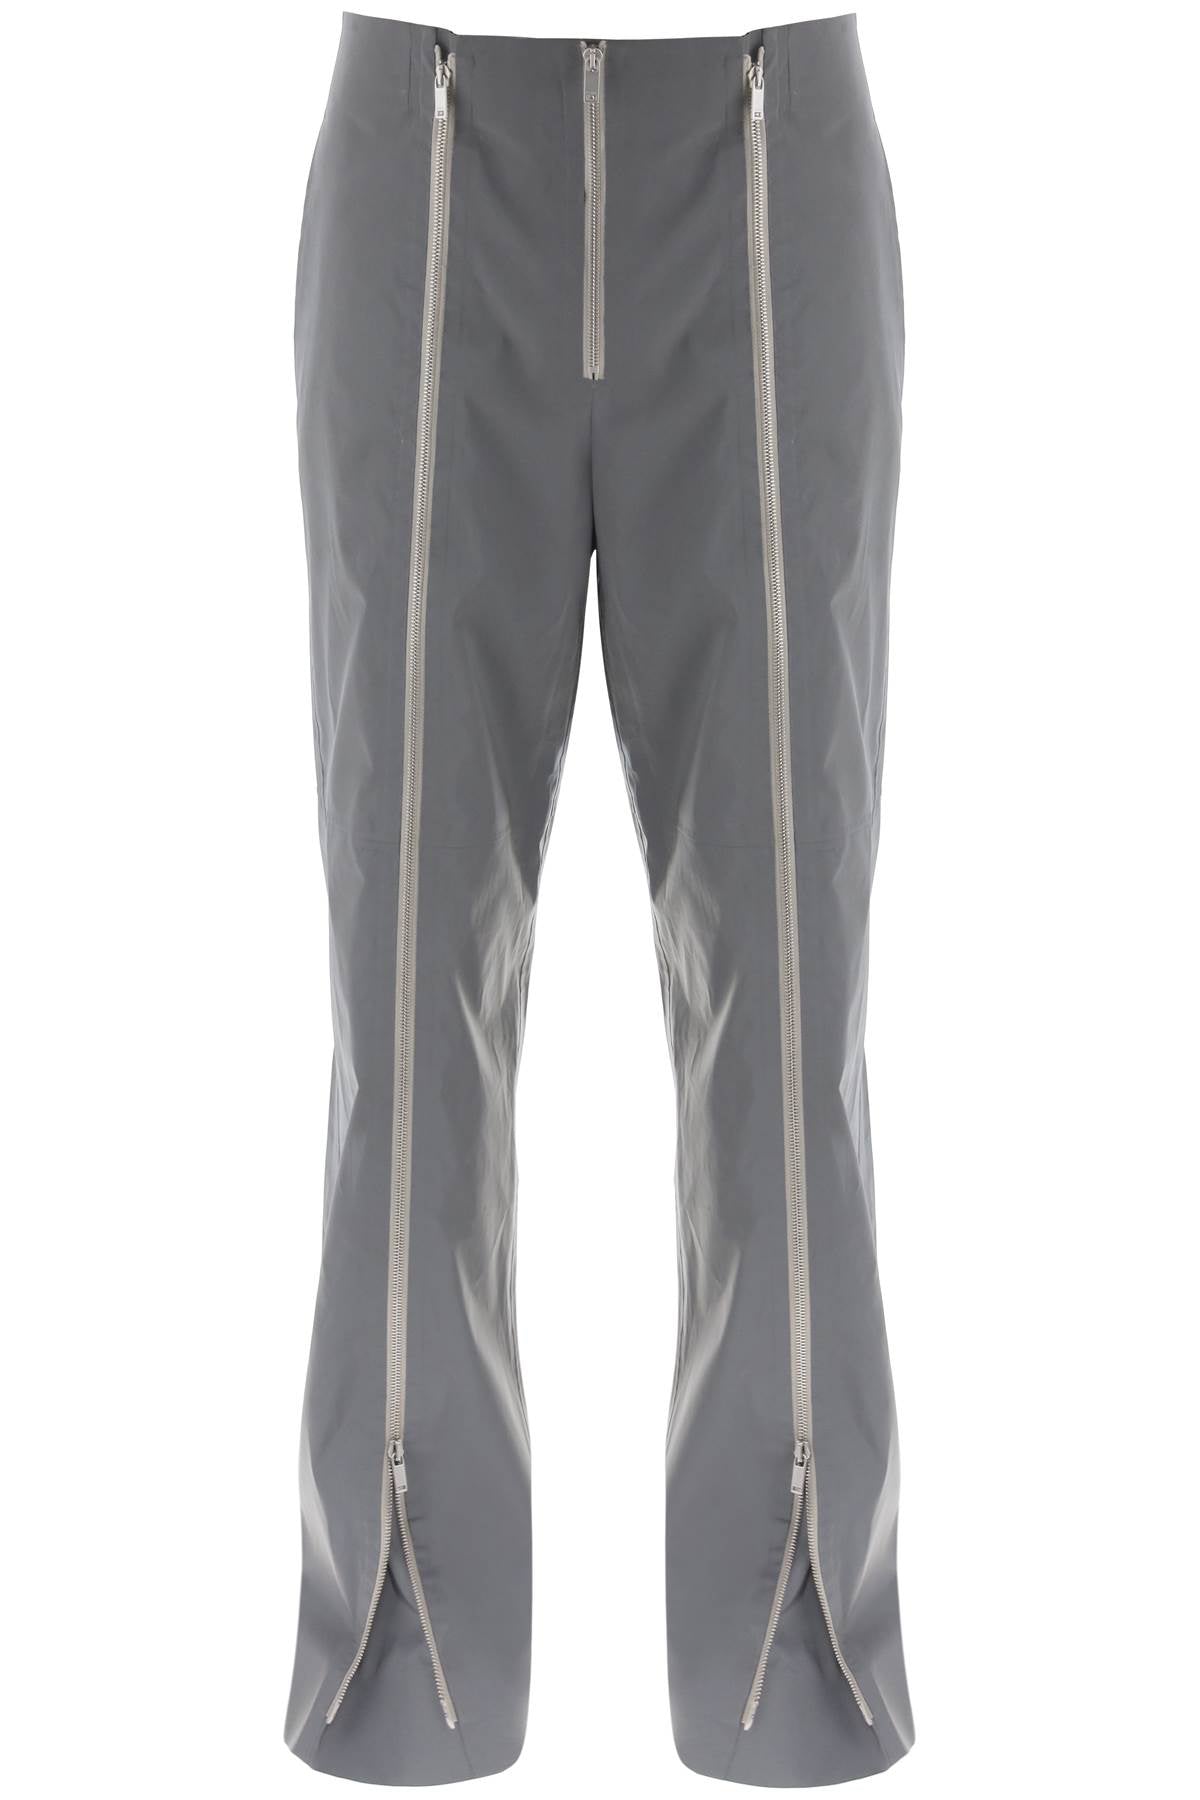 Jil Sander Men's Reflective Fabric Pants With Adjustable Wide Cut In Grey